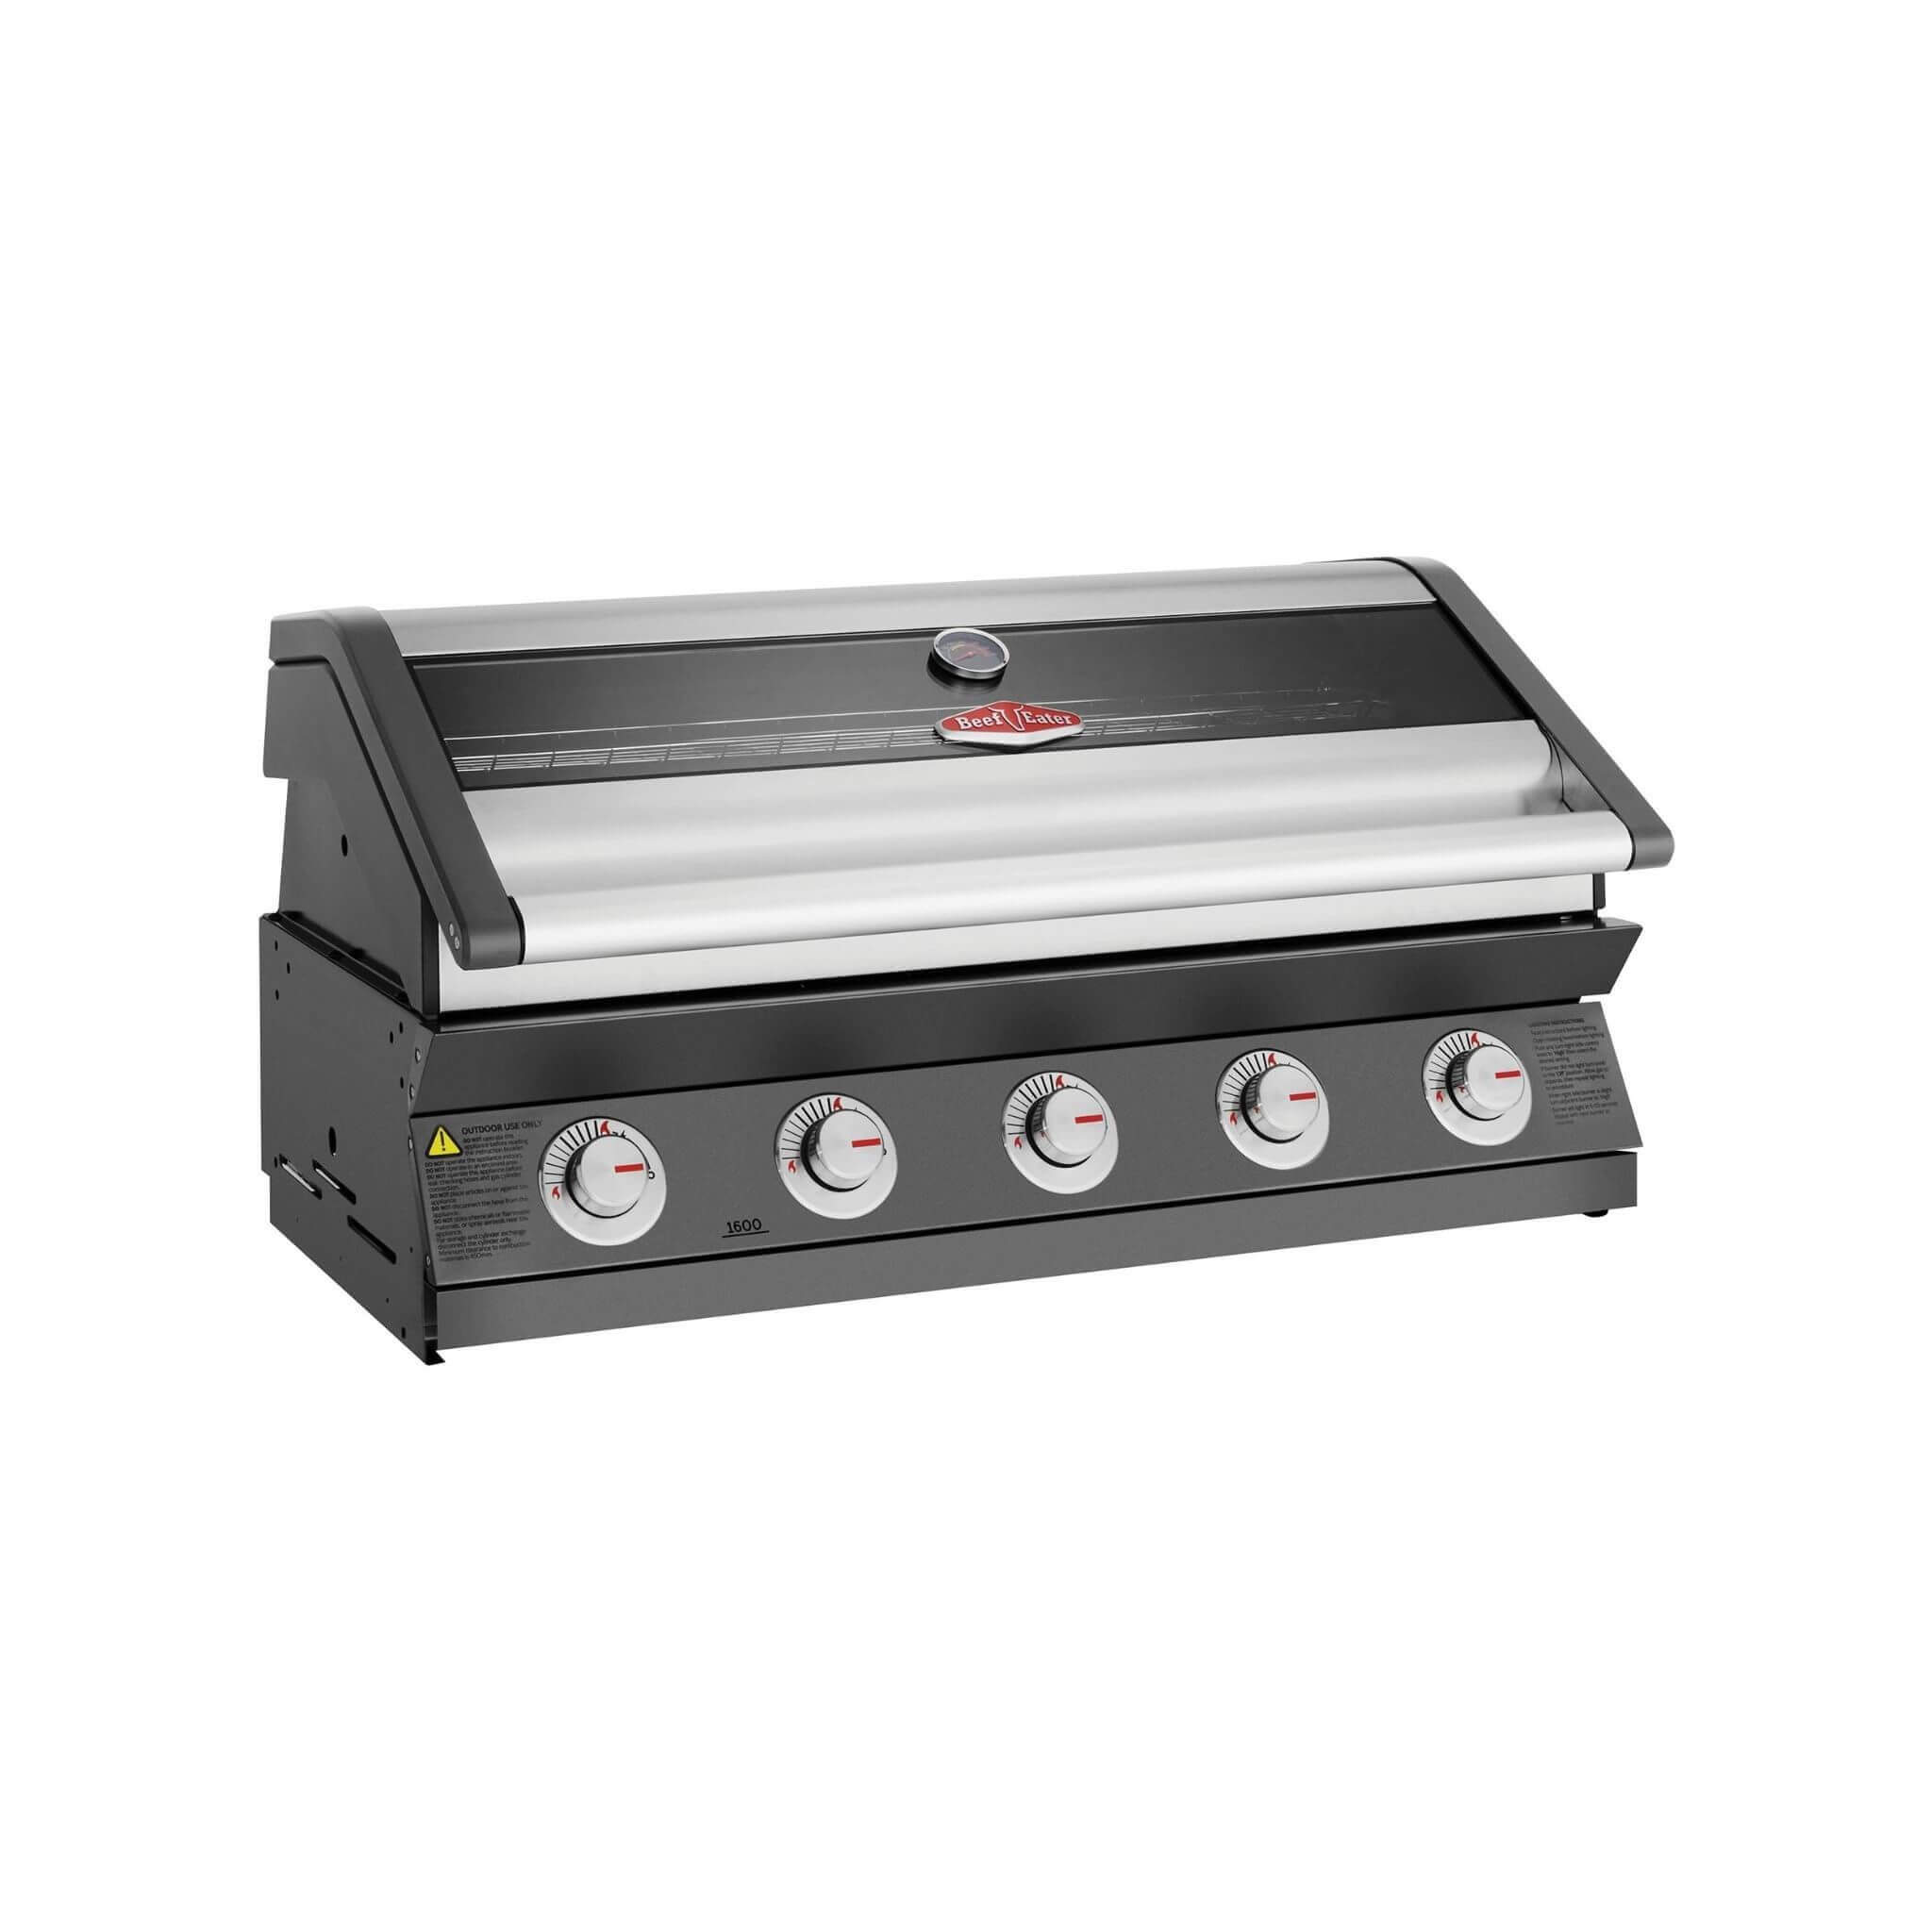 BeefEater Discovery 1600 Series - 5 Burner Built In Gas BBQ (Dark Grey Enamel or Stainless Steel)